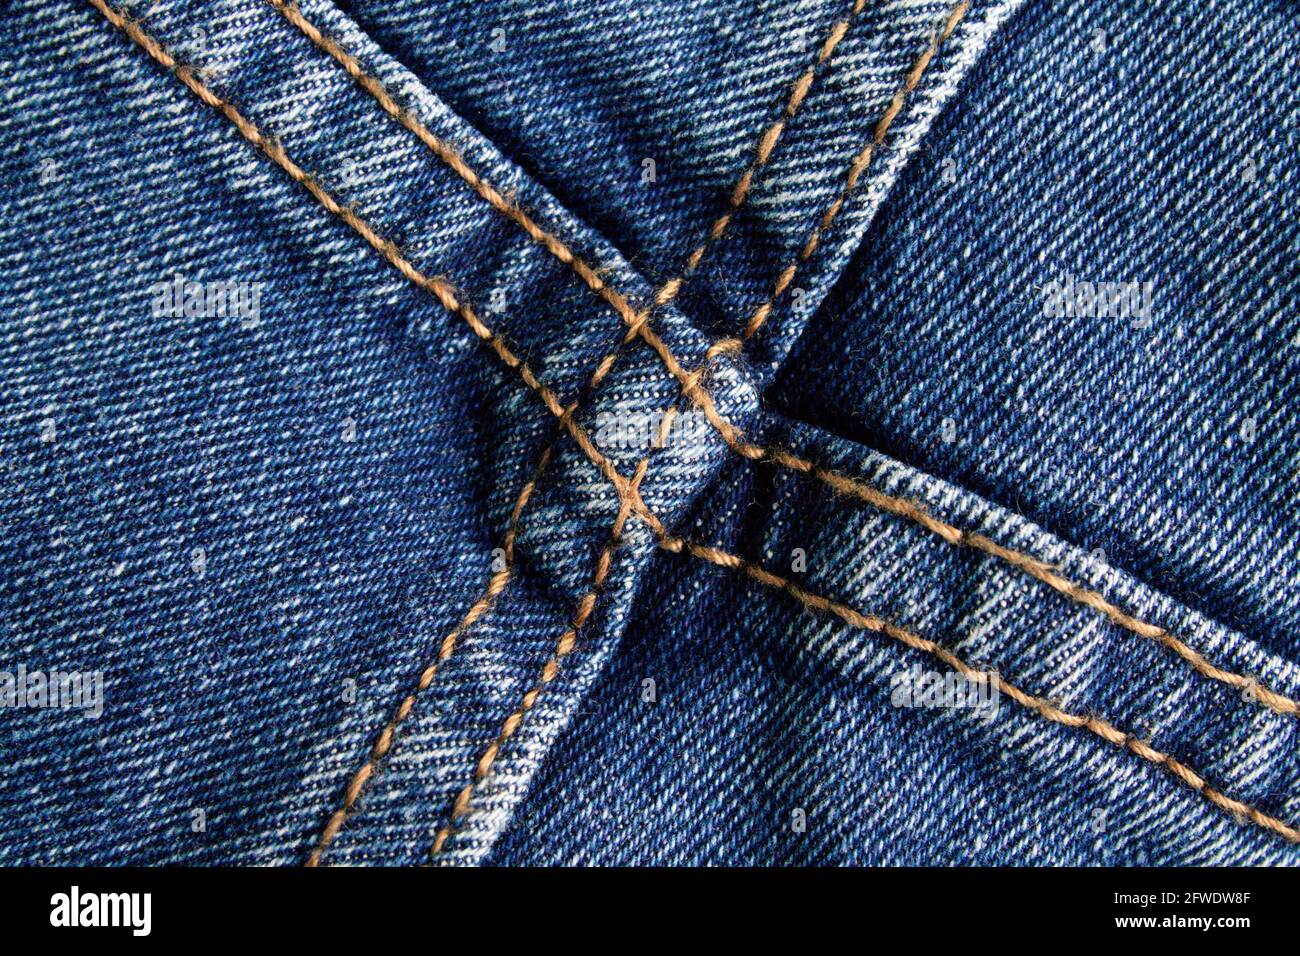 Denim texture. Blue jeans close up. Light blue thick fabric for trousers  Stock Photo - Alamy